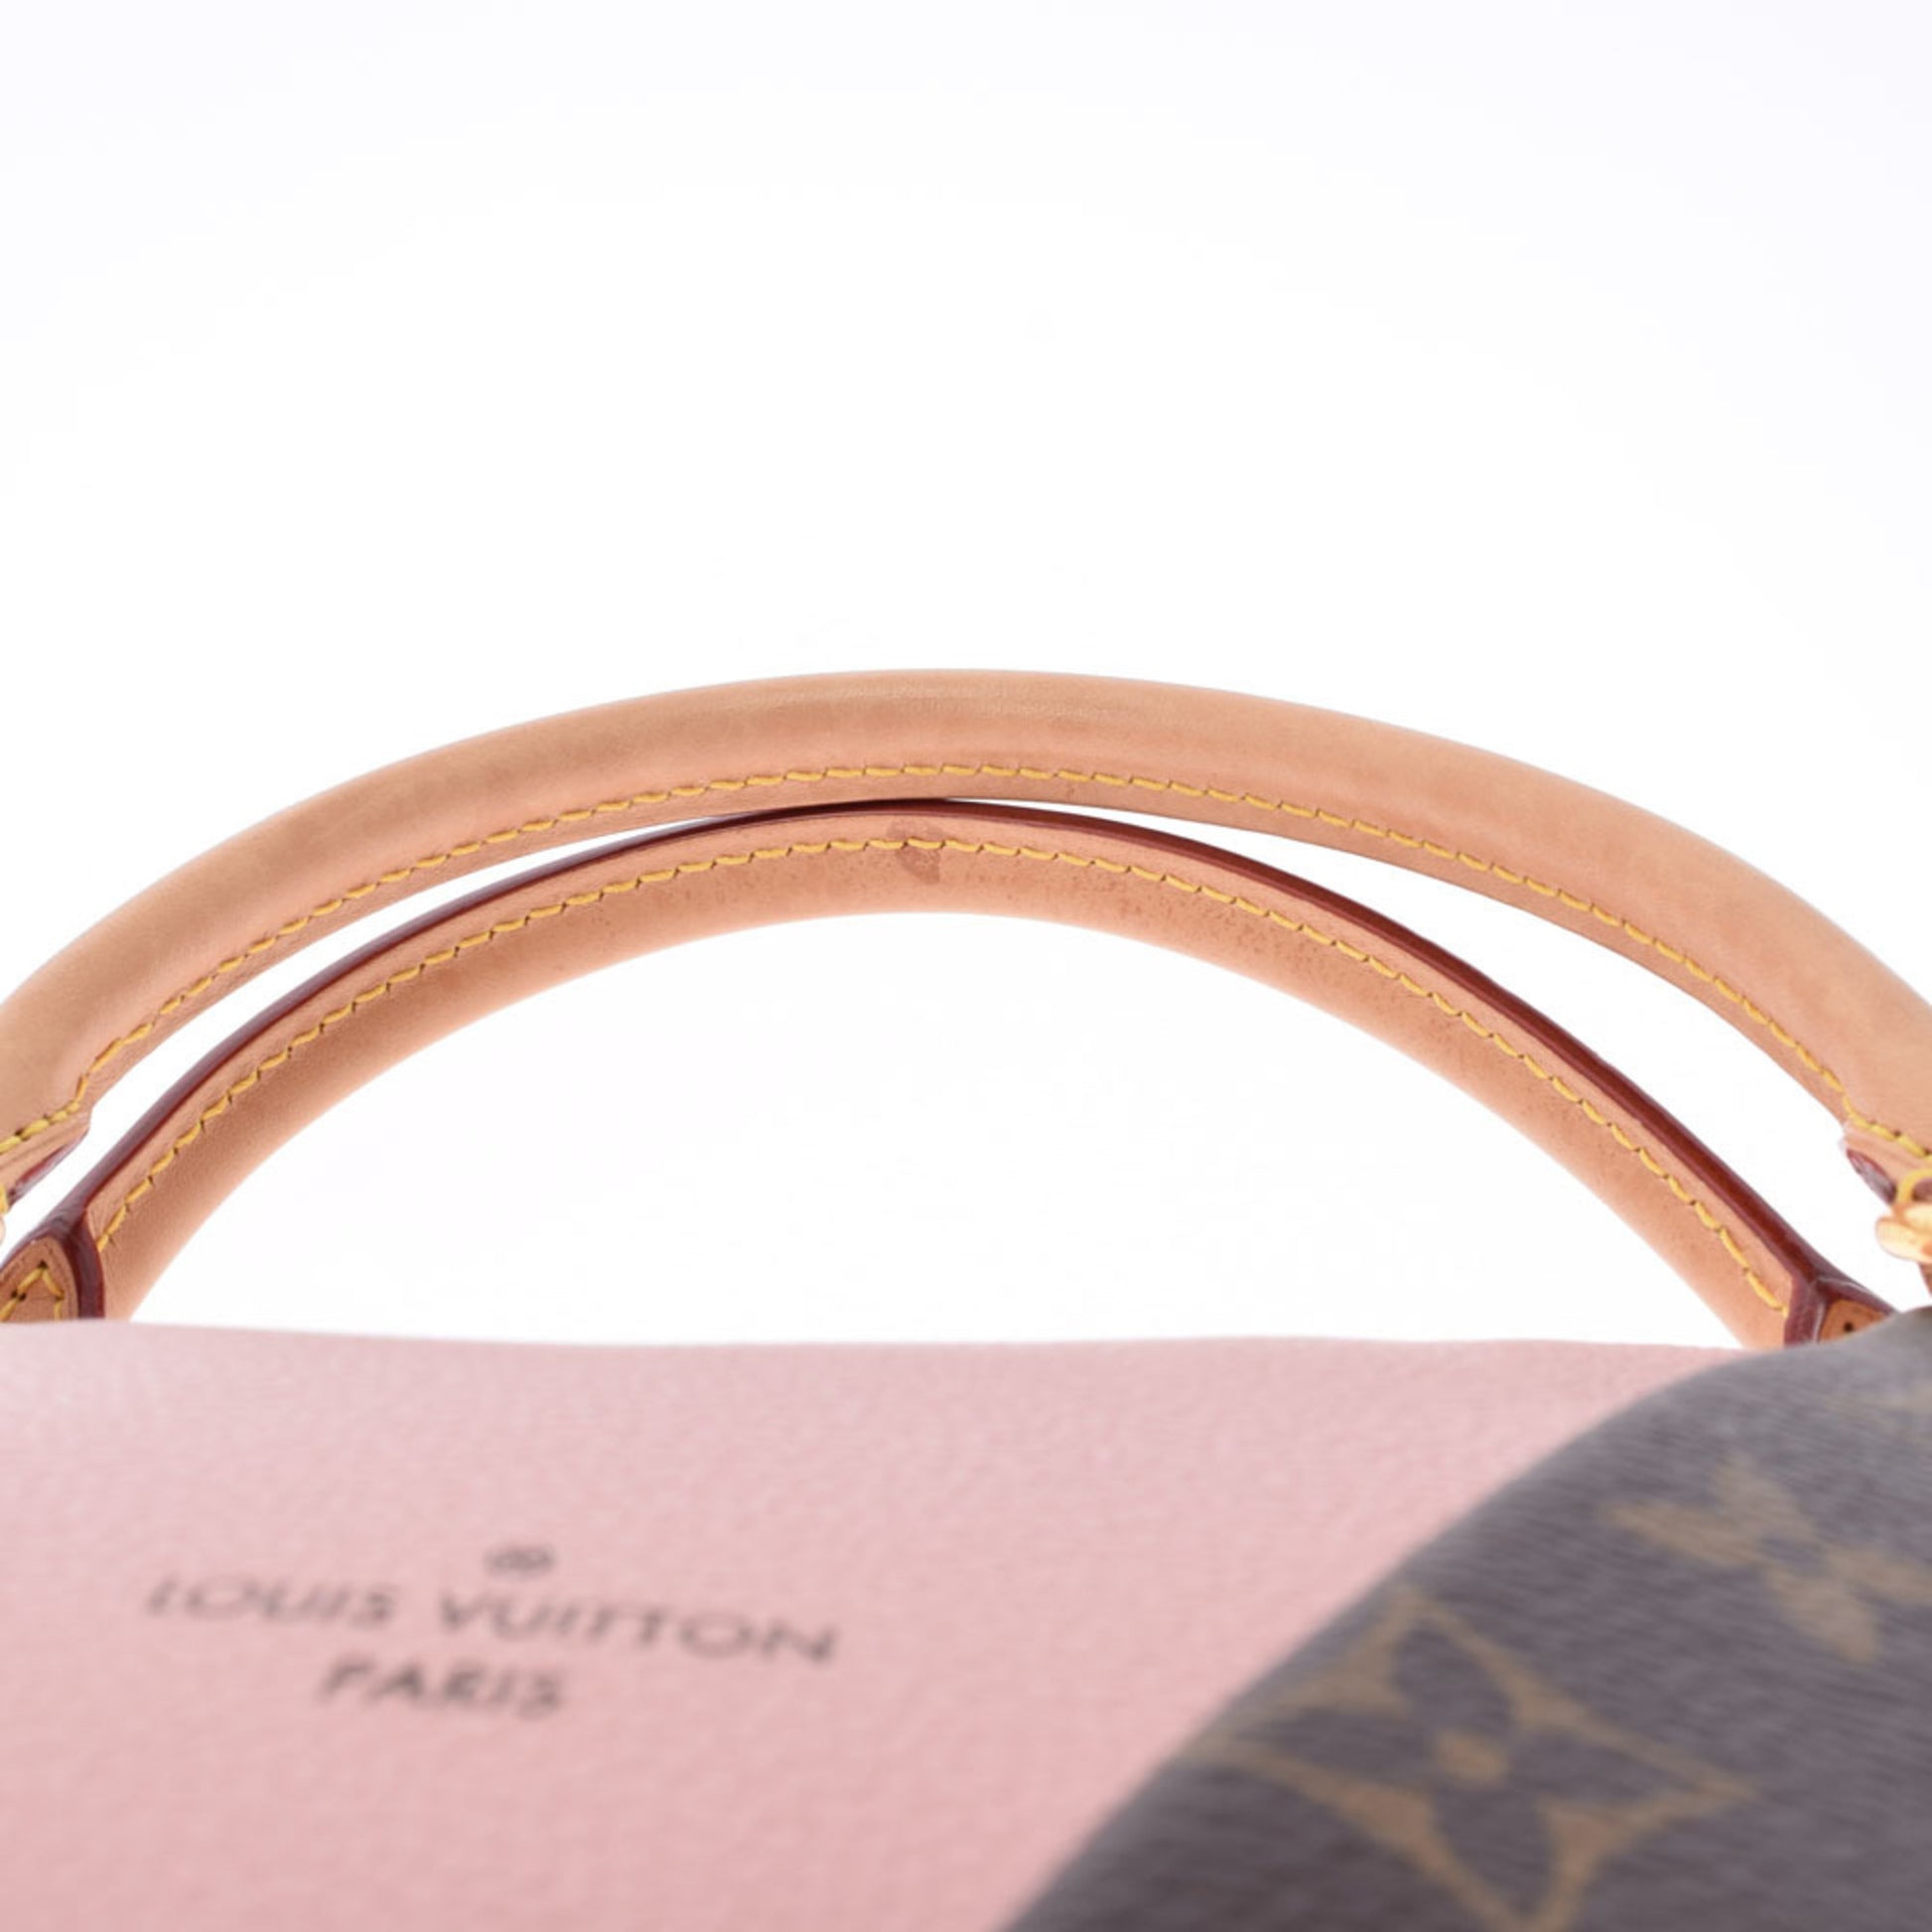 Louis Vuitton Monogram V Tote BB Rose – The Don's Luxury Goods